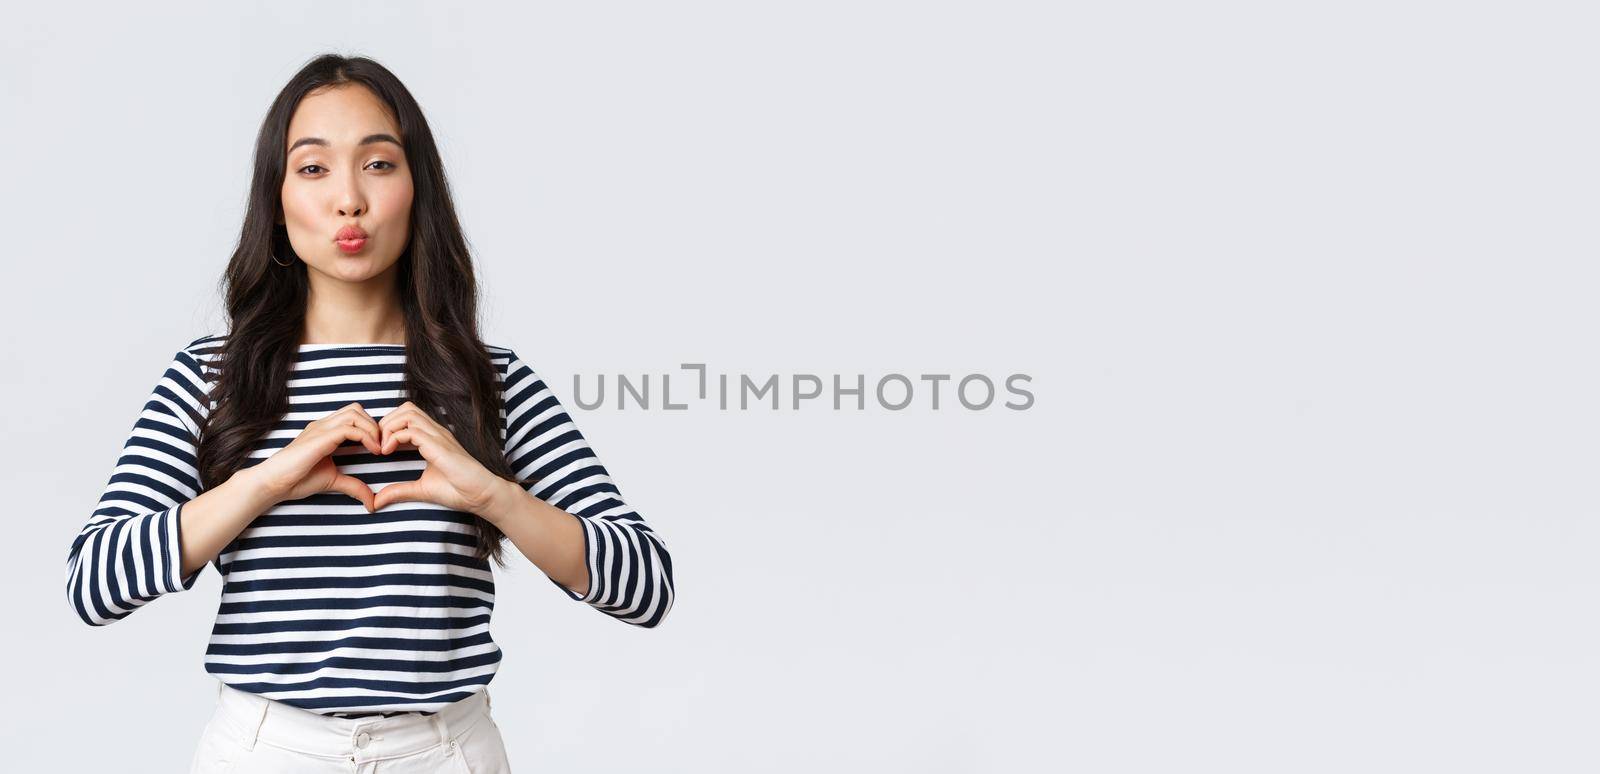 Lifestyle, people emotions and casual concept. Lovely smiling adorable asian woman showing heart sign and smiling, express sympathy or care, sending air kiss at camera, standing white background.